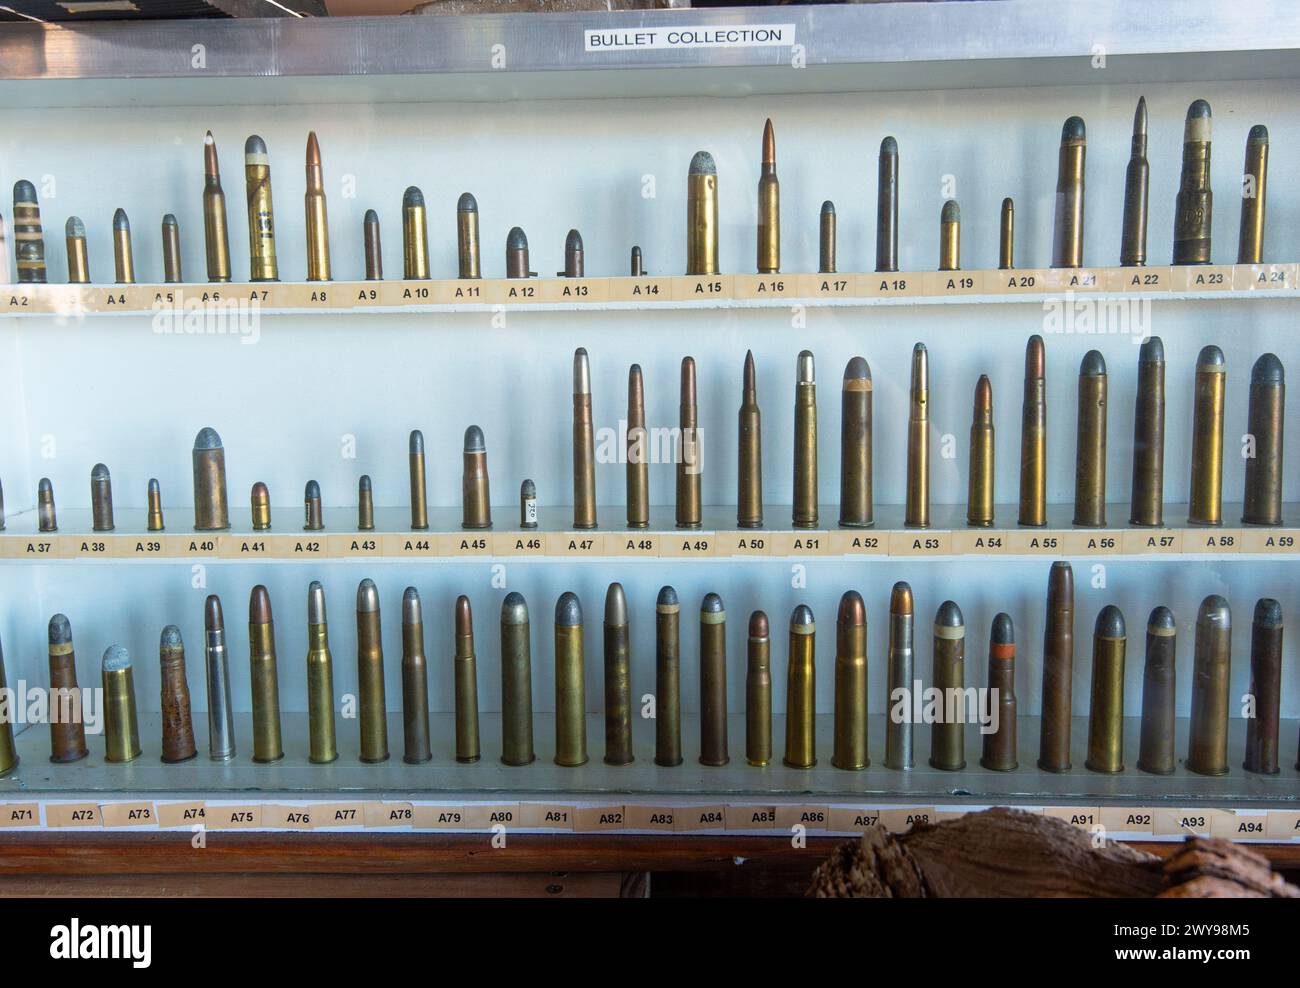 Display of bullet collection Stock Photo